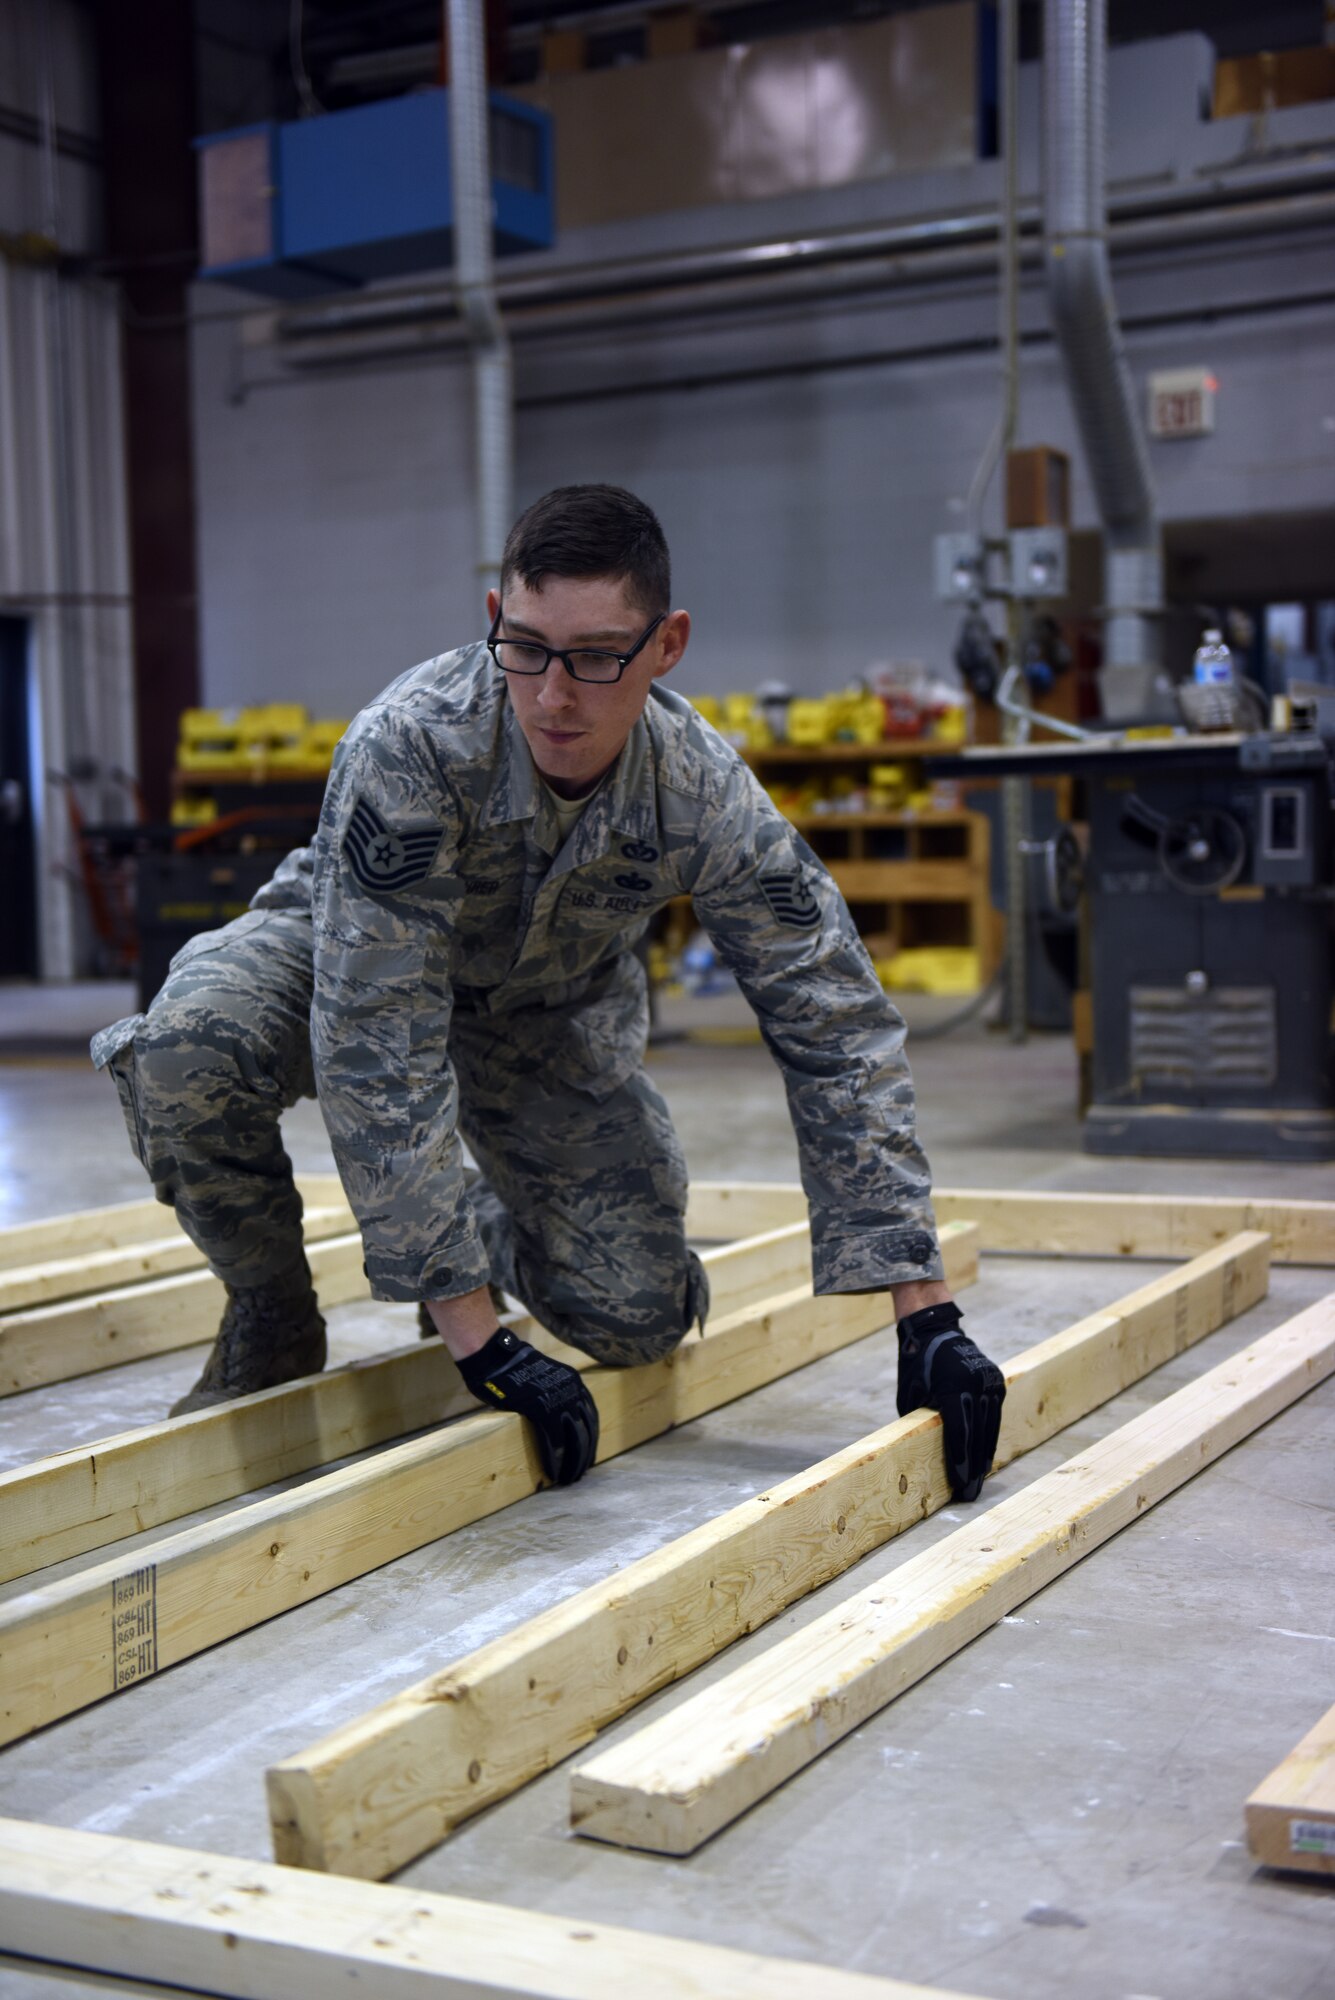 Tech. Sgt. Seth Maurer, a structures specialist with the 201st RED HORSE, Fort Indiantown Gap, Pennsylvania, puts together the frame of a wall to complete training requirements Oct. 28, 2018. Maurer has been with the 201st RHS since 2014 when he separated from active-duty and moved to Pennsylvania with his family. (U.S. Air National Guard photo by Senior Airman Julia Sorber/Released)